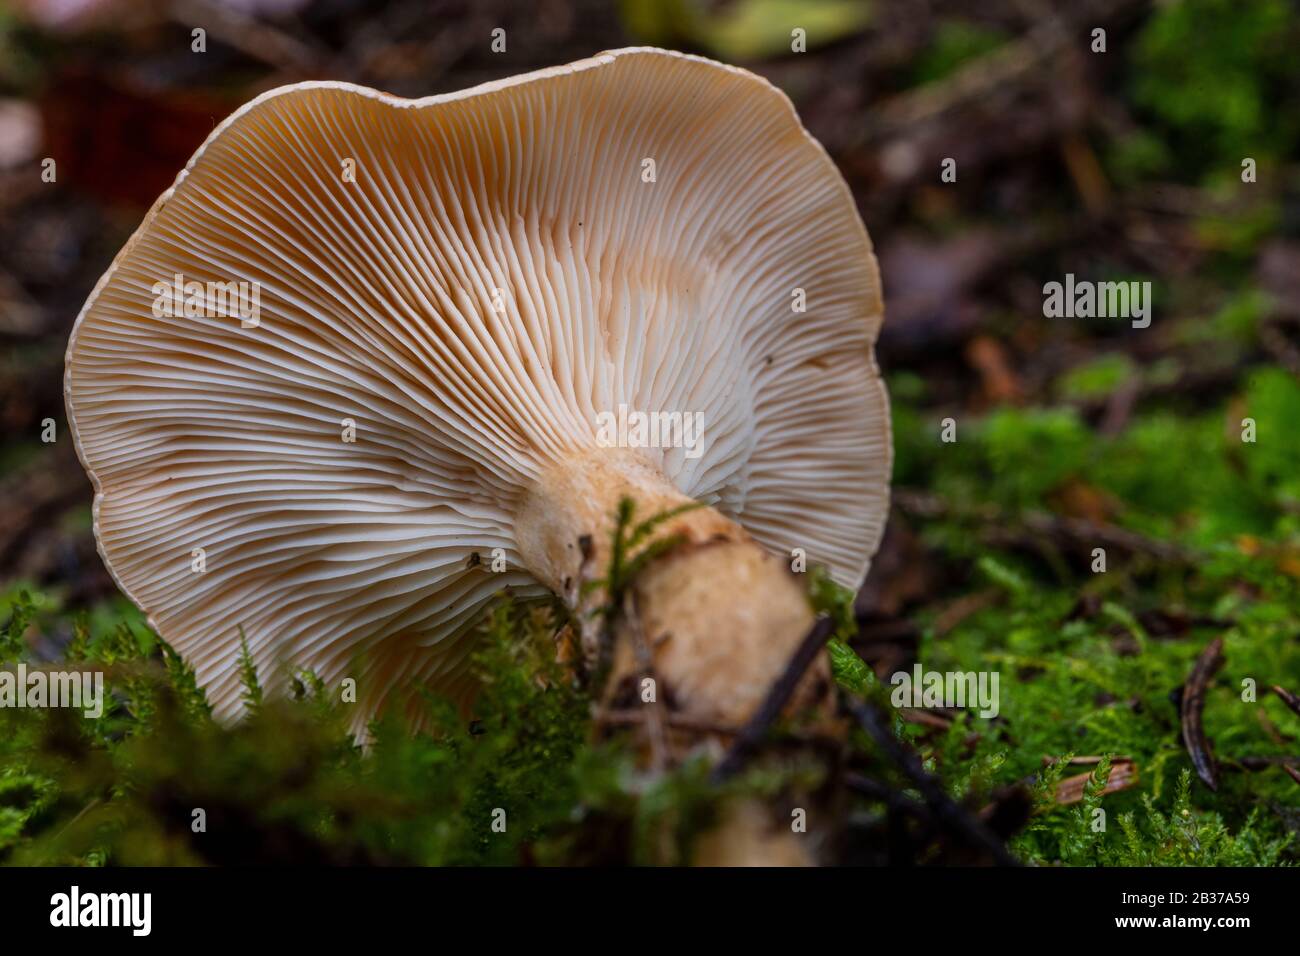 France, Somme (80), Crécy-en-Ponthieu, Crécy forest, mushroom in the forest, Paralepista inversa, Lepista inversa Stock Photo